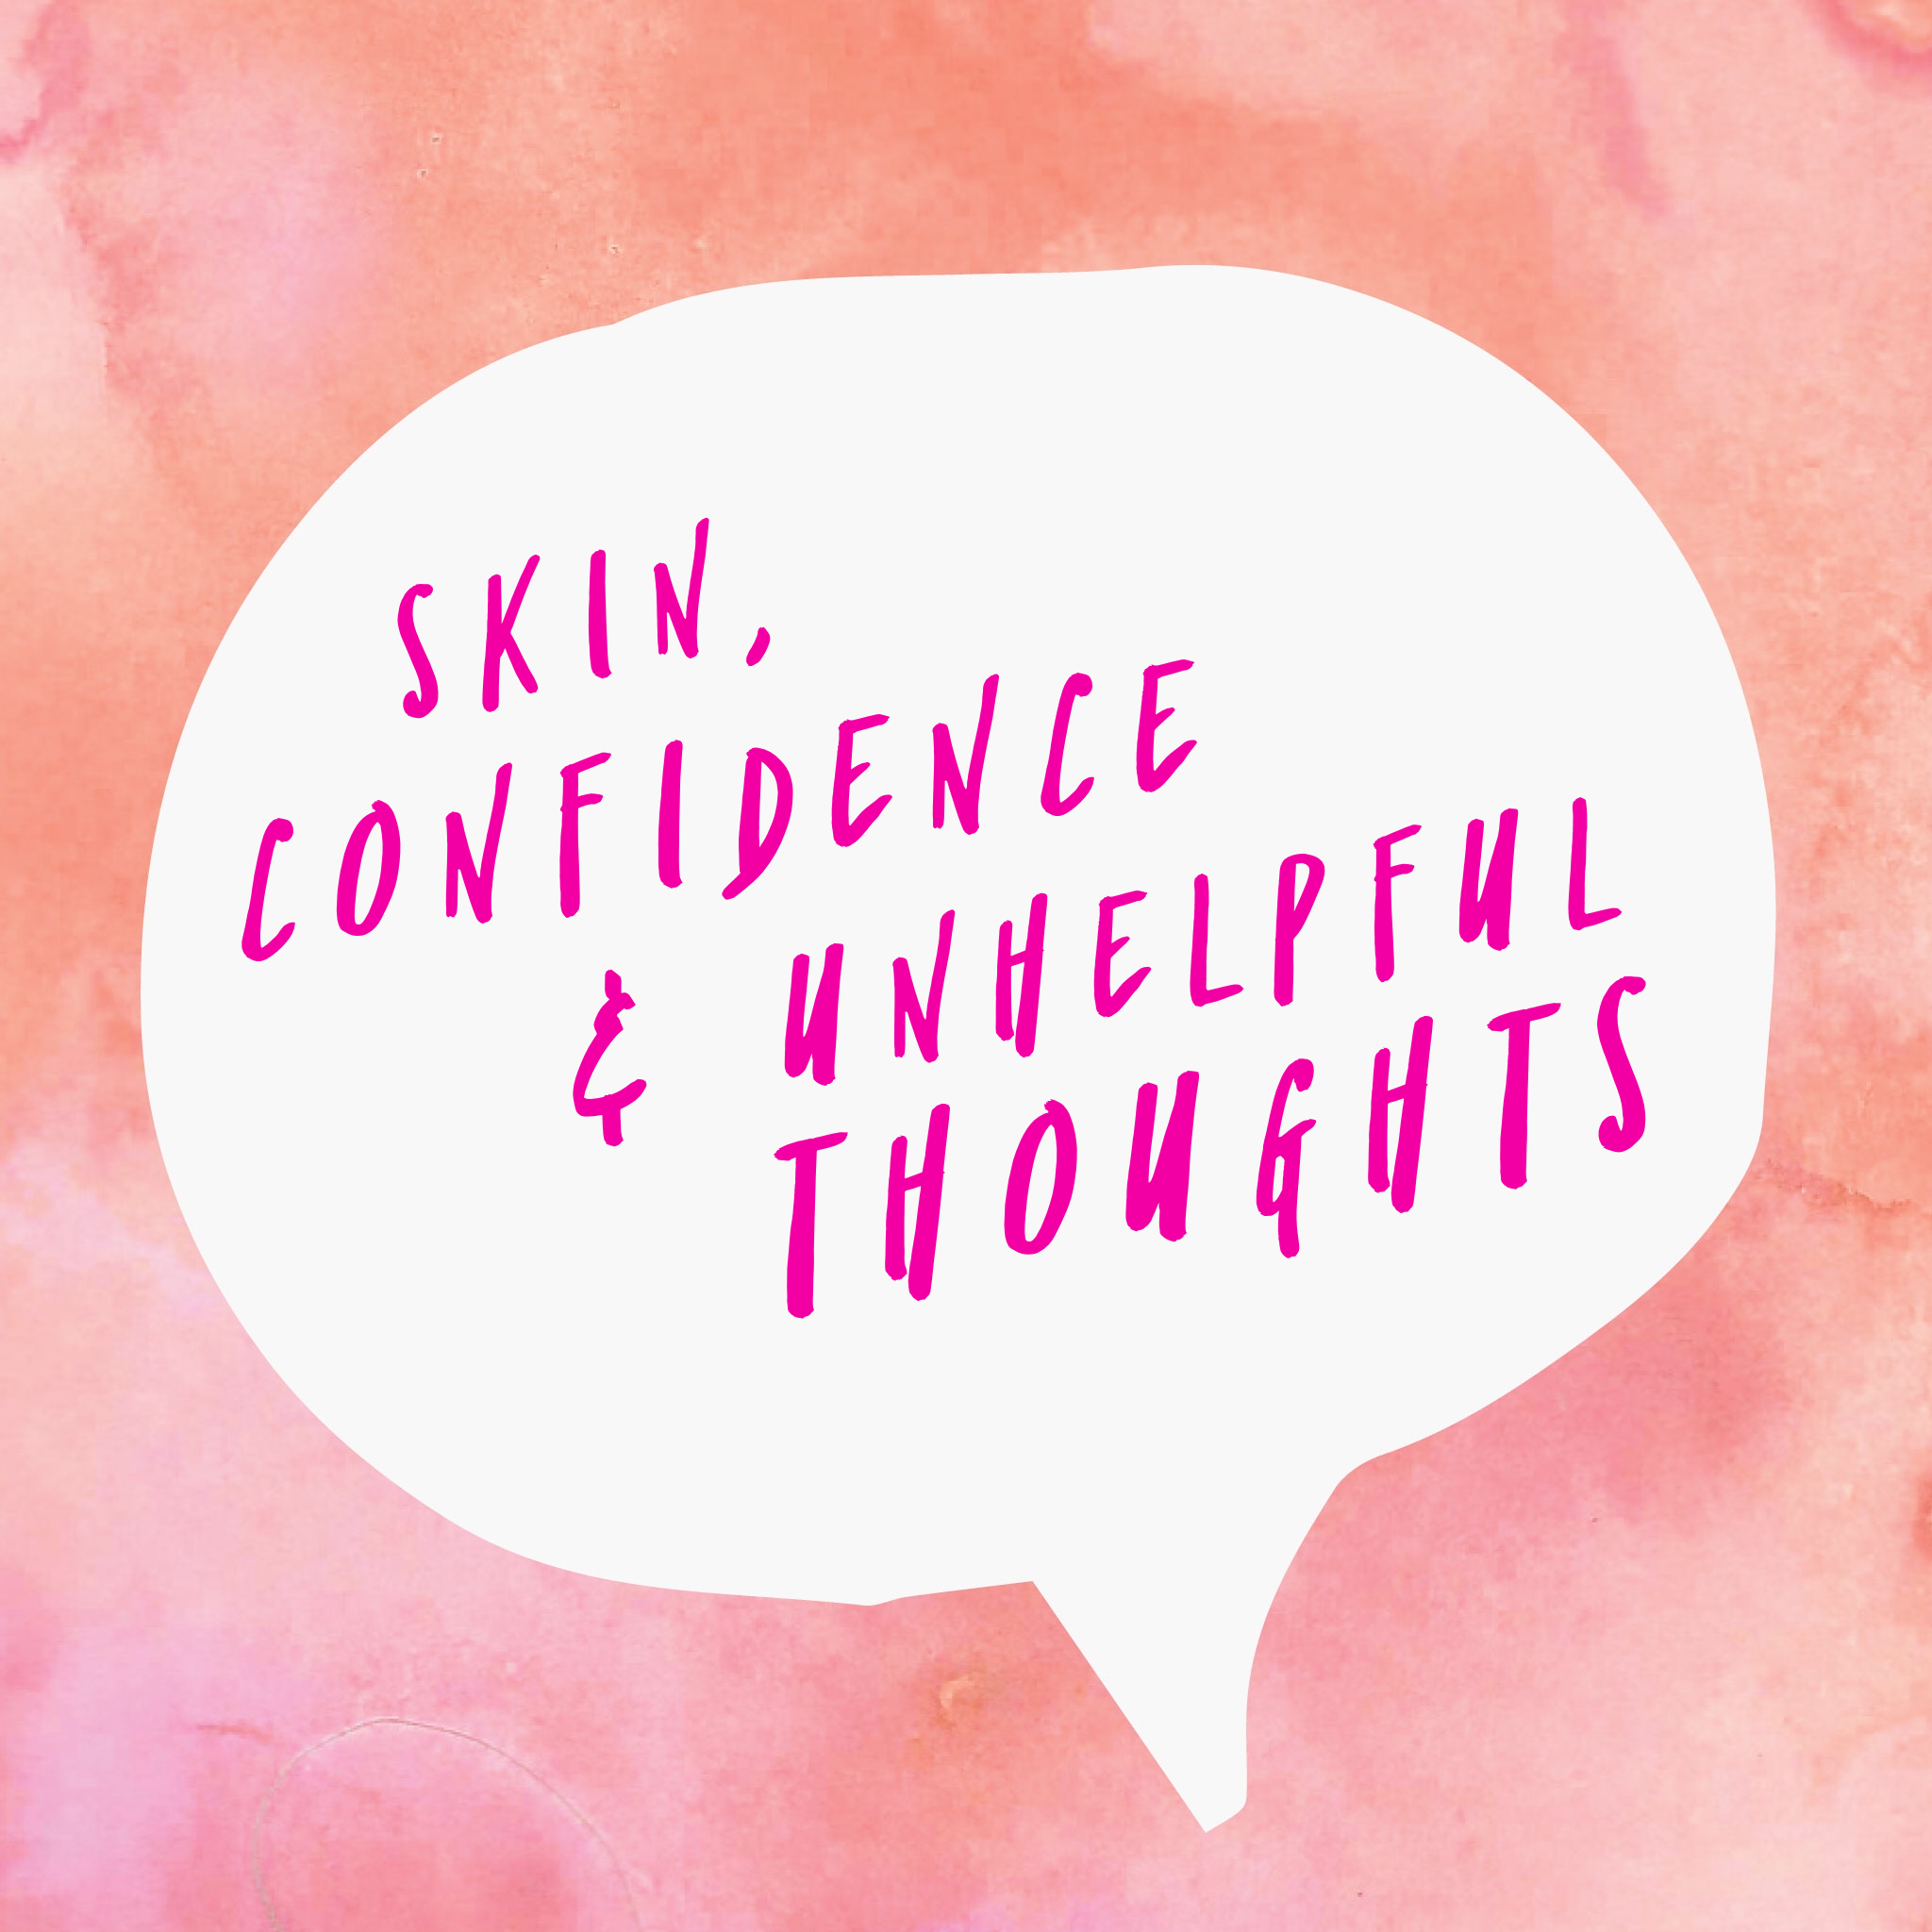 Skin, confidence & unhelpful thoughts